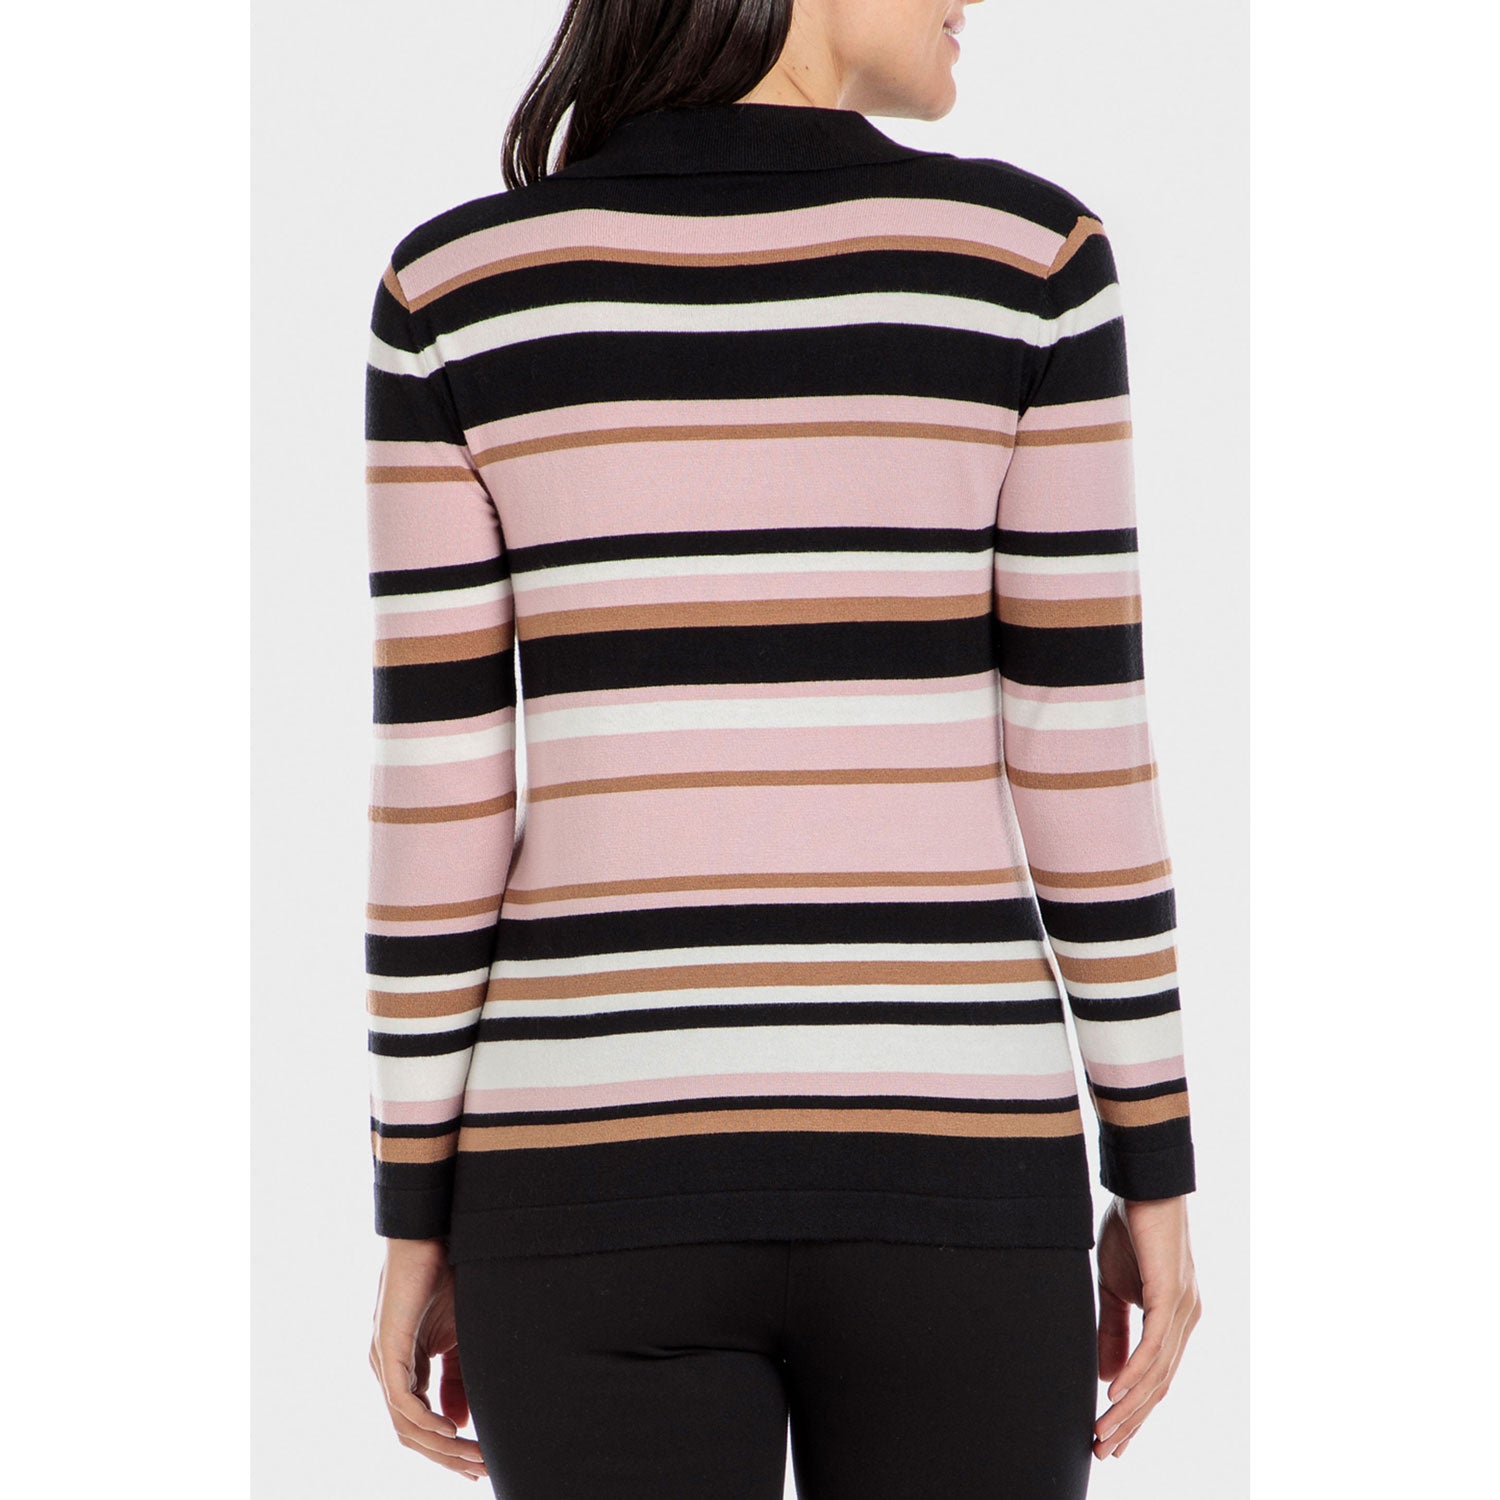 Punt Roma Multi-Coloured Striped Sweater - Black 2 Shaws Department Stores